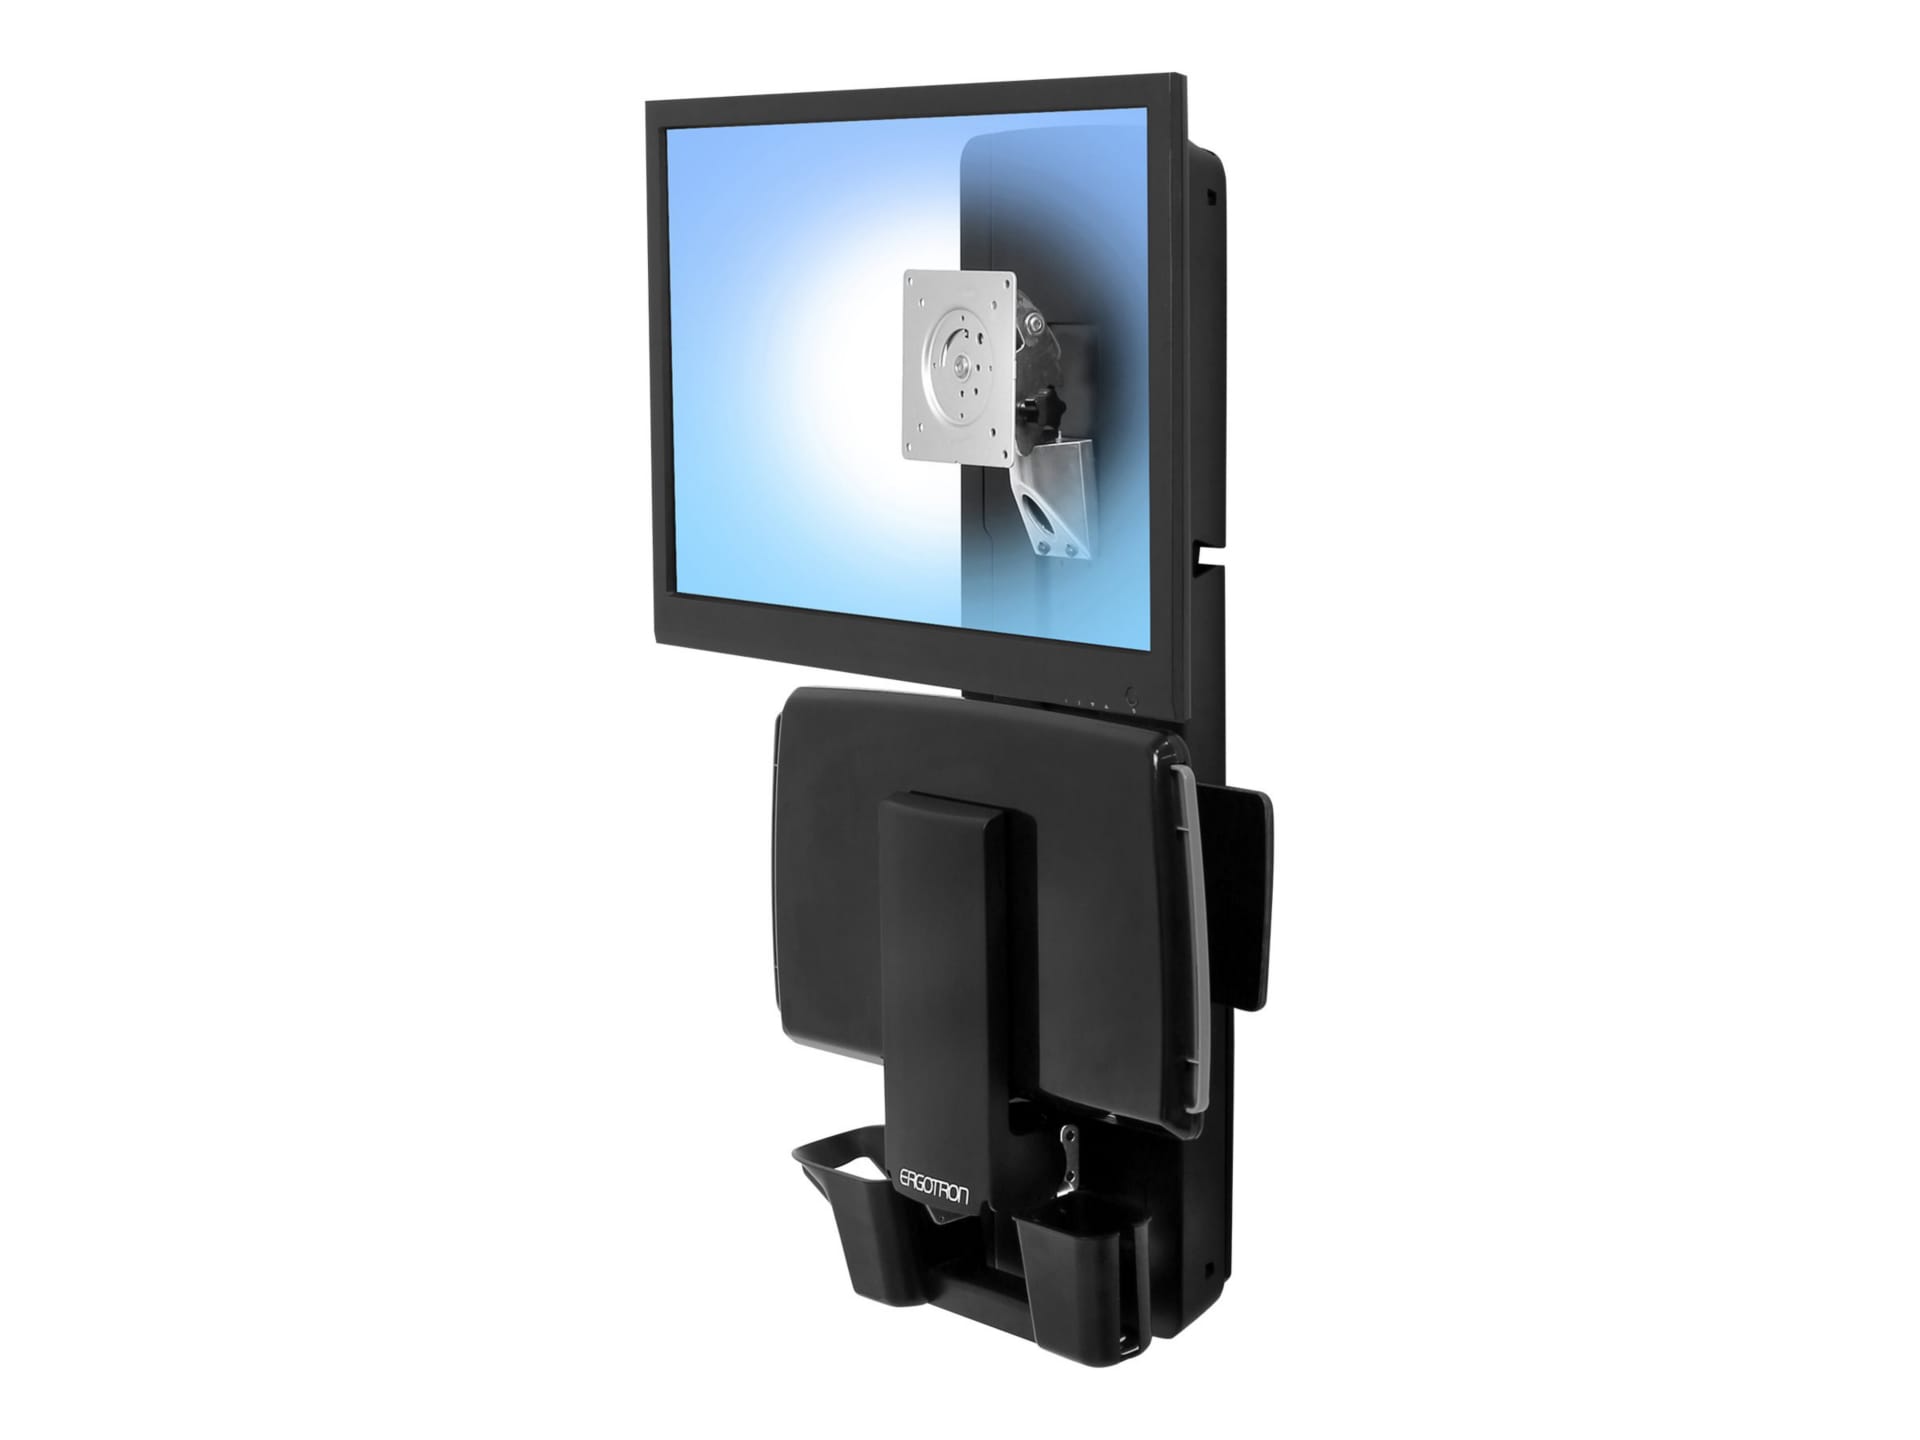 Ergotron StyleView Sit-Stand Vertical Lift, Patient Room mounting kit - for LCD display / keyboard / mouse / barcode